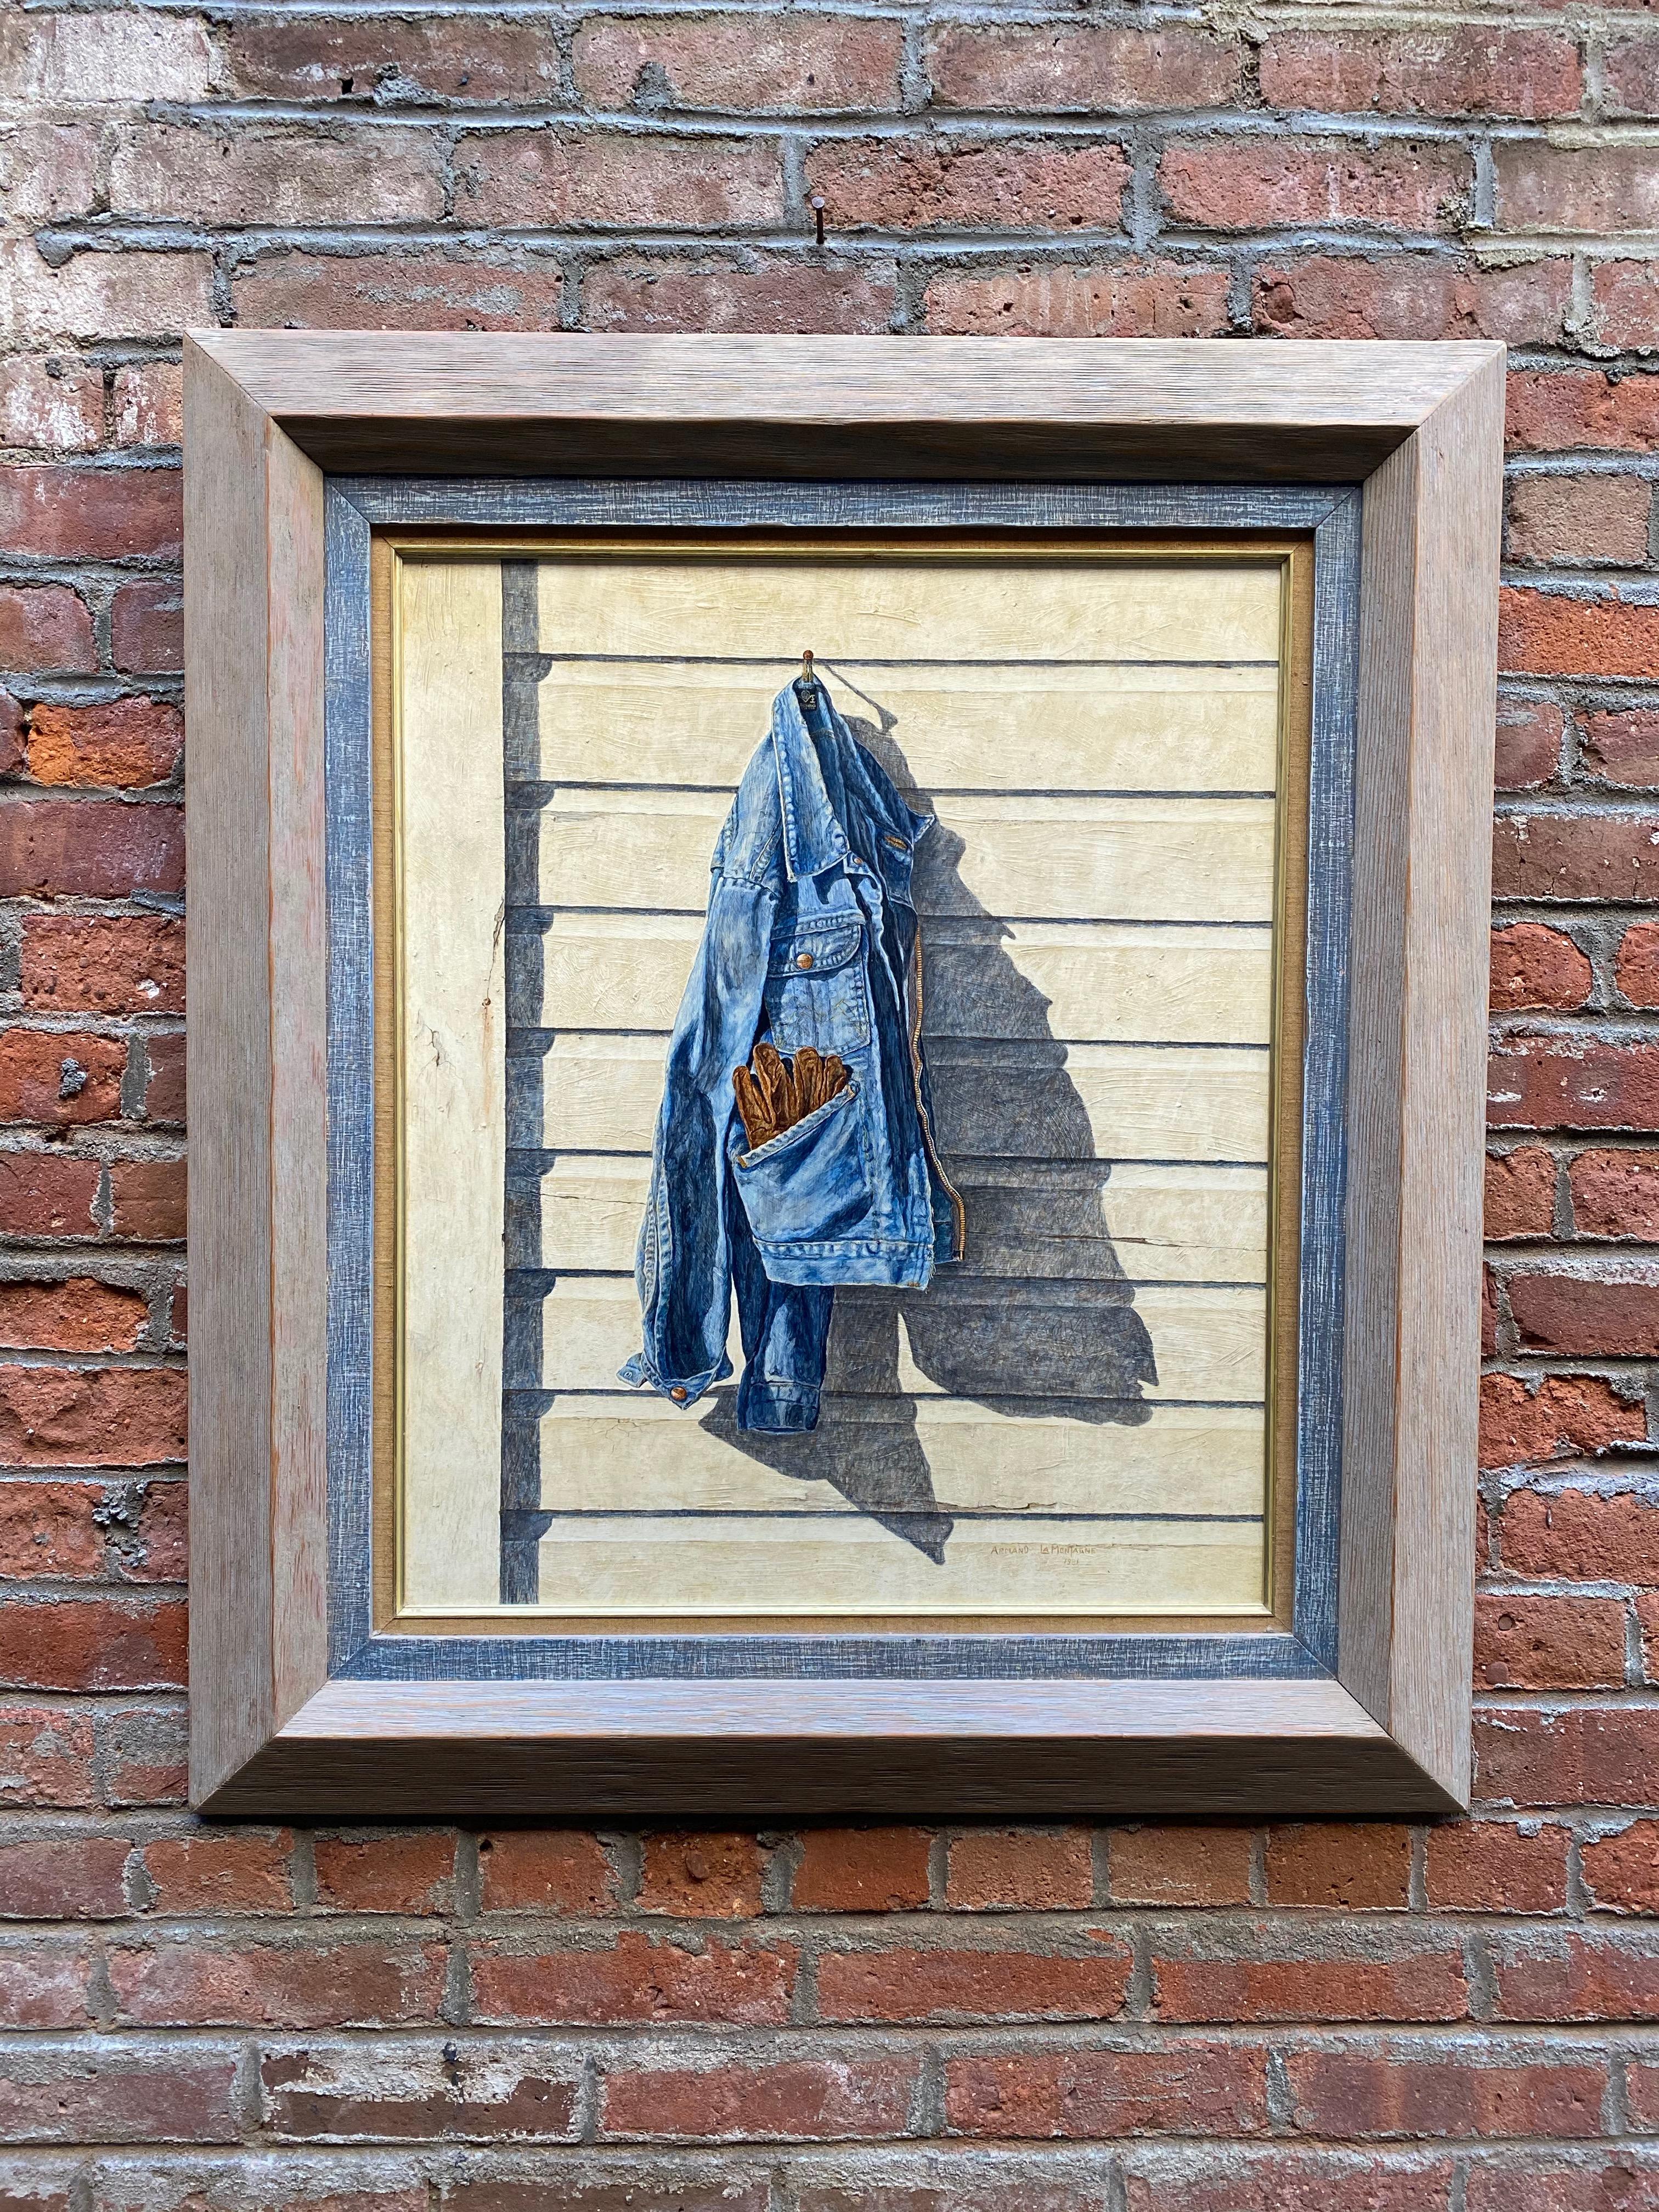 Hyper Realist oil painting on Masonite board by Armand LaMontagne. Signed and dated, Armand LaMontagne, 1981. LaMontagne (born 1939) has produced one of his painstakingly realistic and detailed renderings of a rumpled denim work coat with gloves on